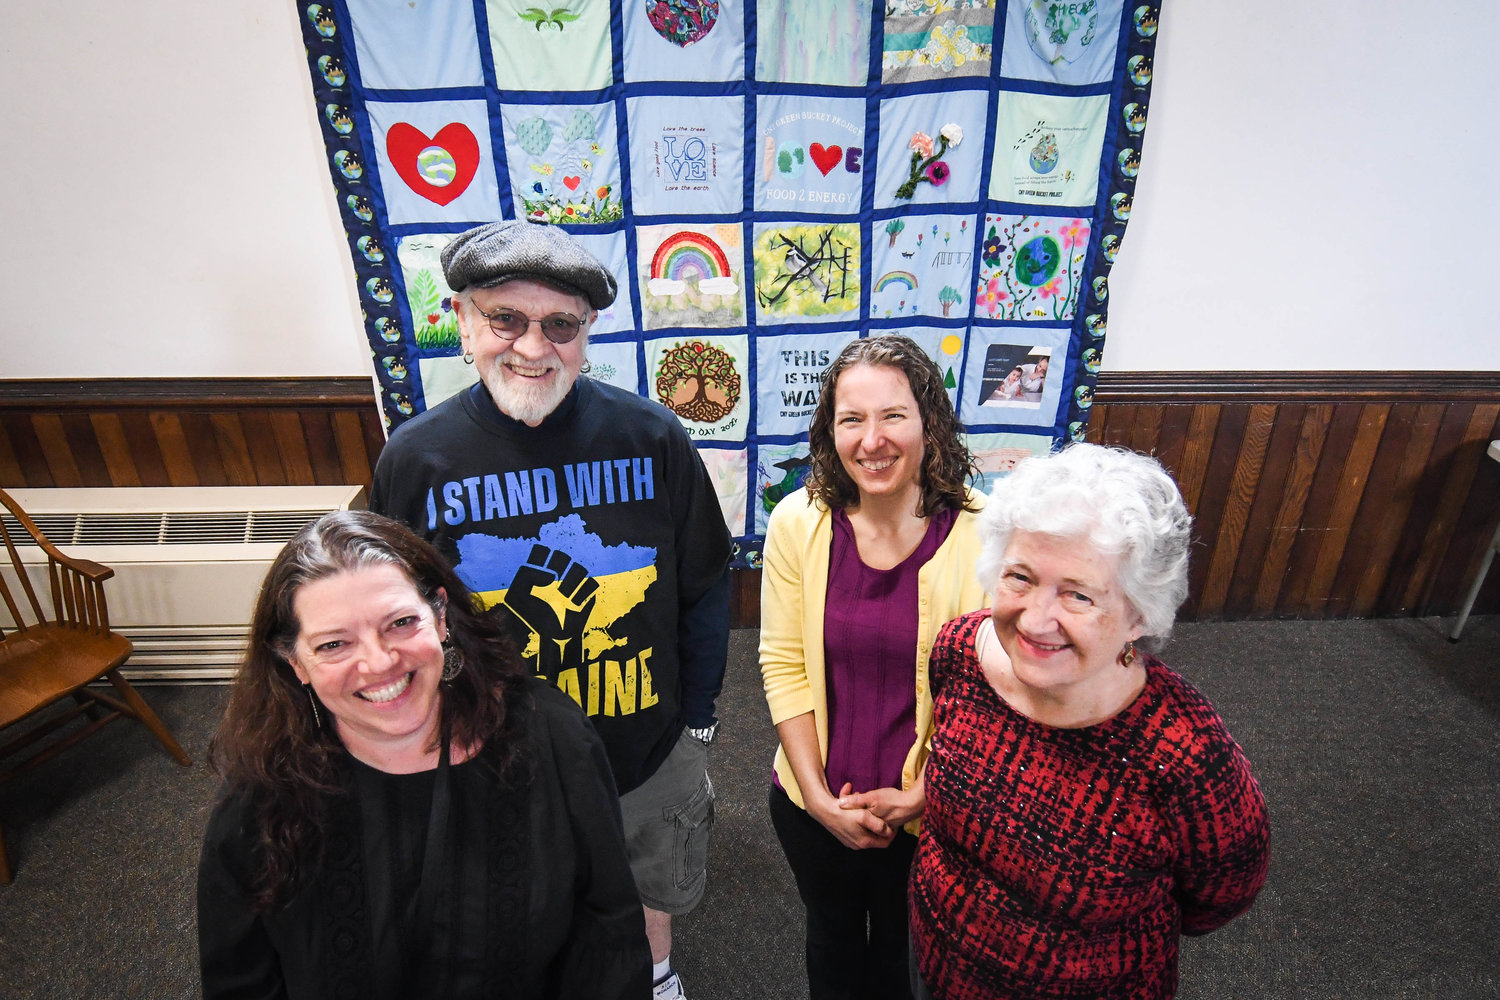 MAKING A DIFFERENCE — Supporters of “Melissa” and her CNY Green Bucket Project, the only food scrap collection service in the area, stand before an Earth Day quilt they helped create that’s now on display at Kirkland Town Library on College Street, Clinton. From left, back: Kevin Conley, and owner Melissa.  From left, front: Sharen Barboza and Sally Carman.